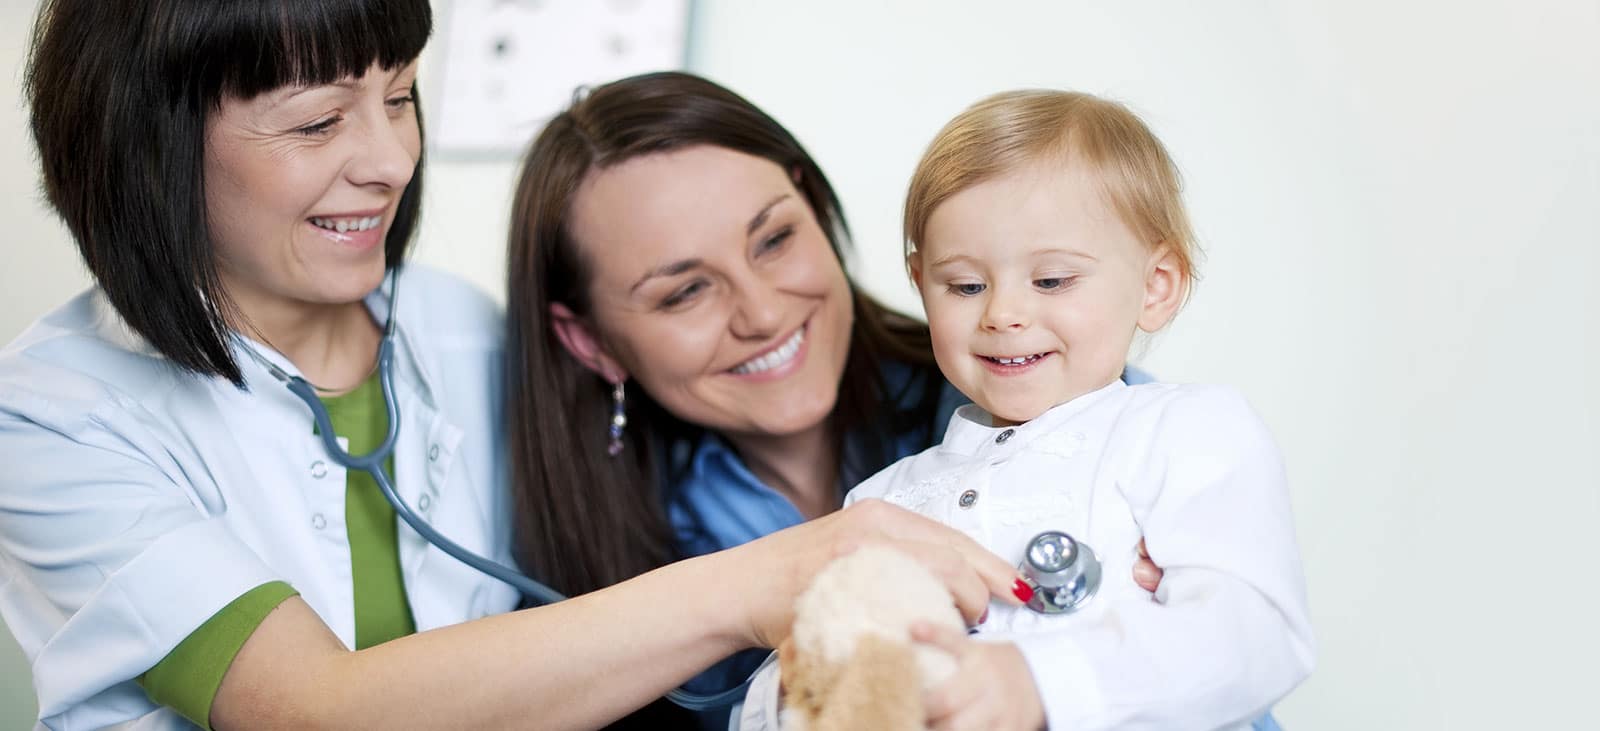 Image of a doctor treating a baby on PSA Financial's website